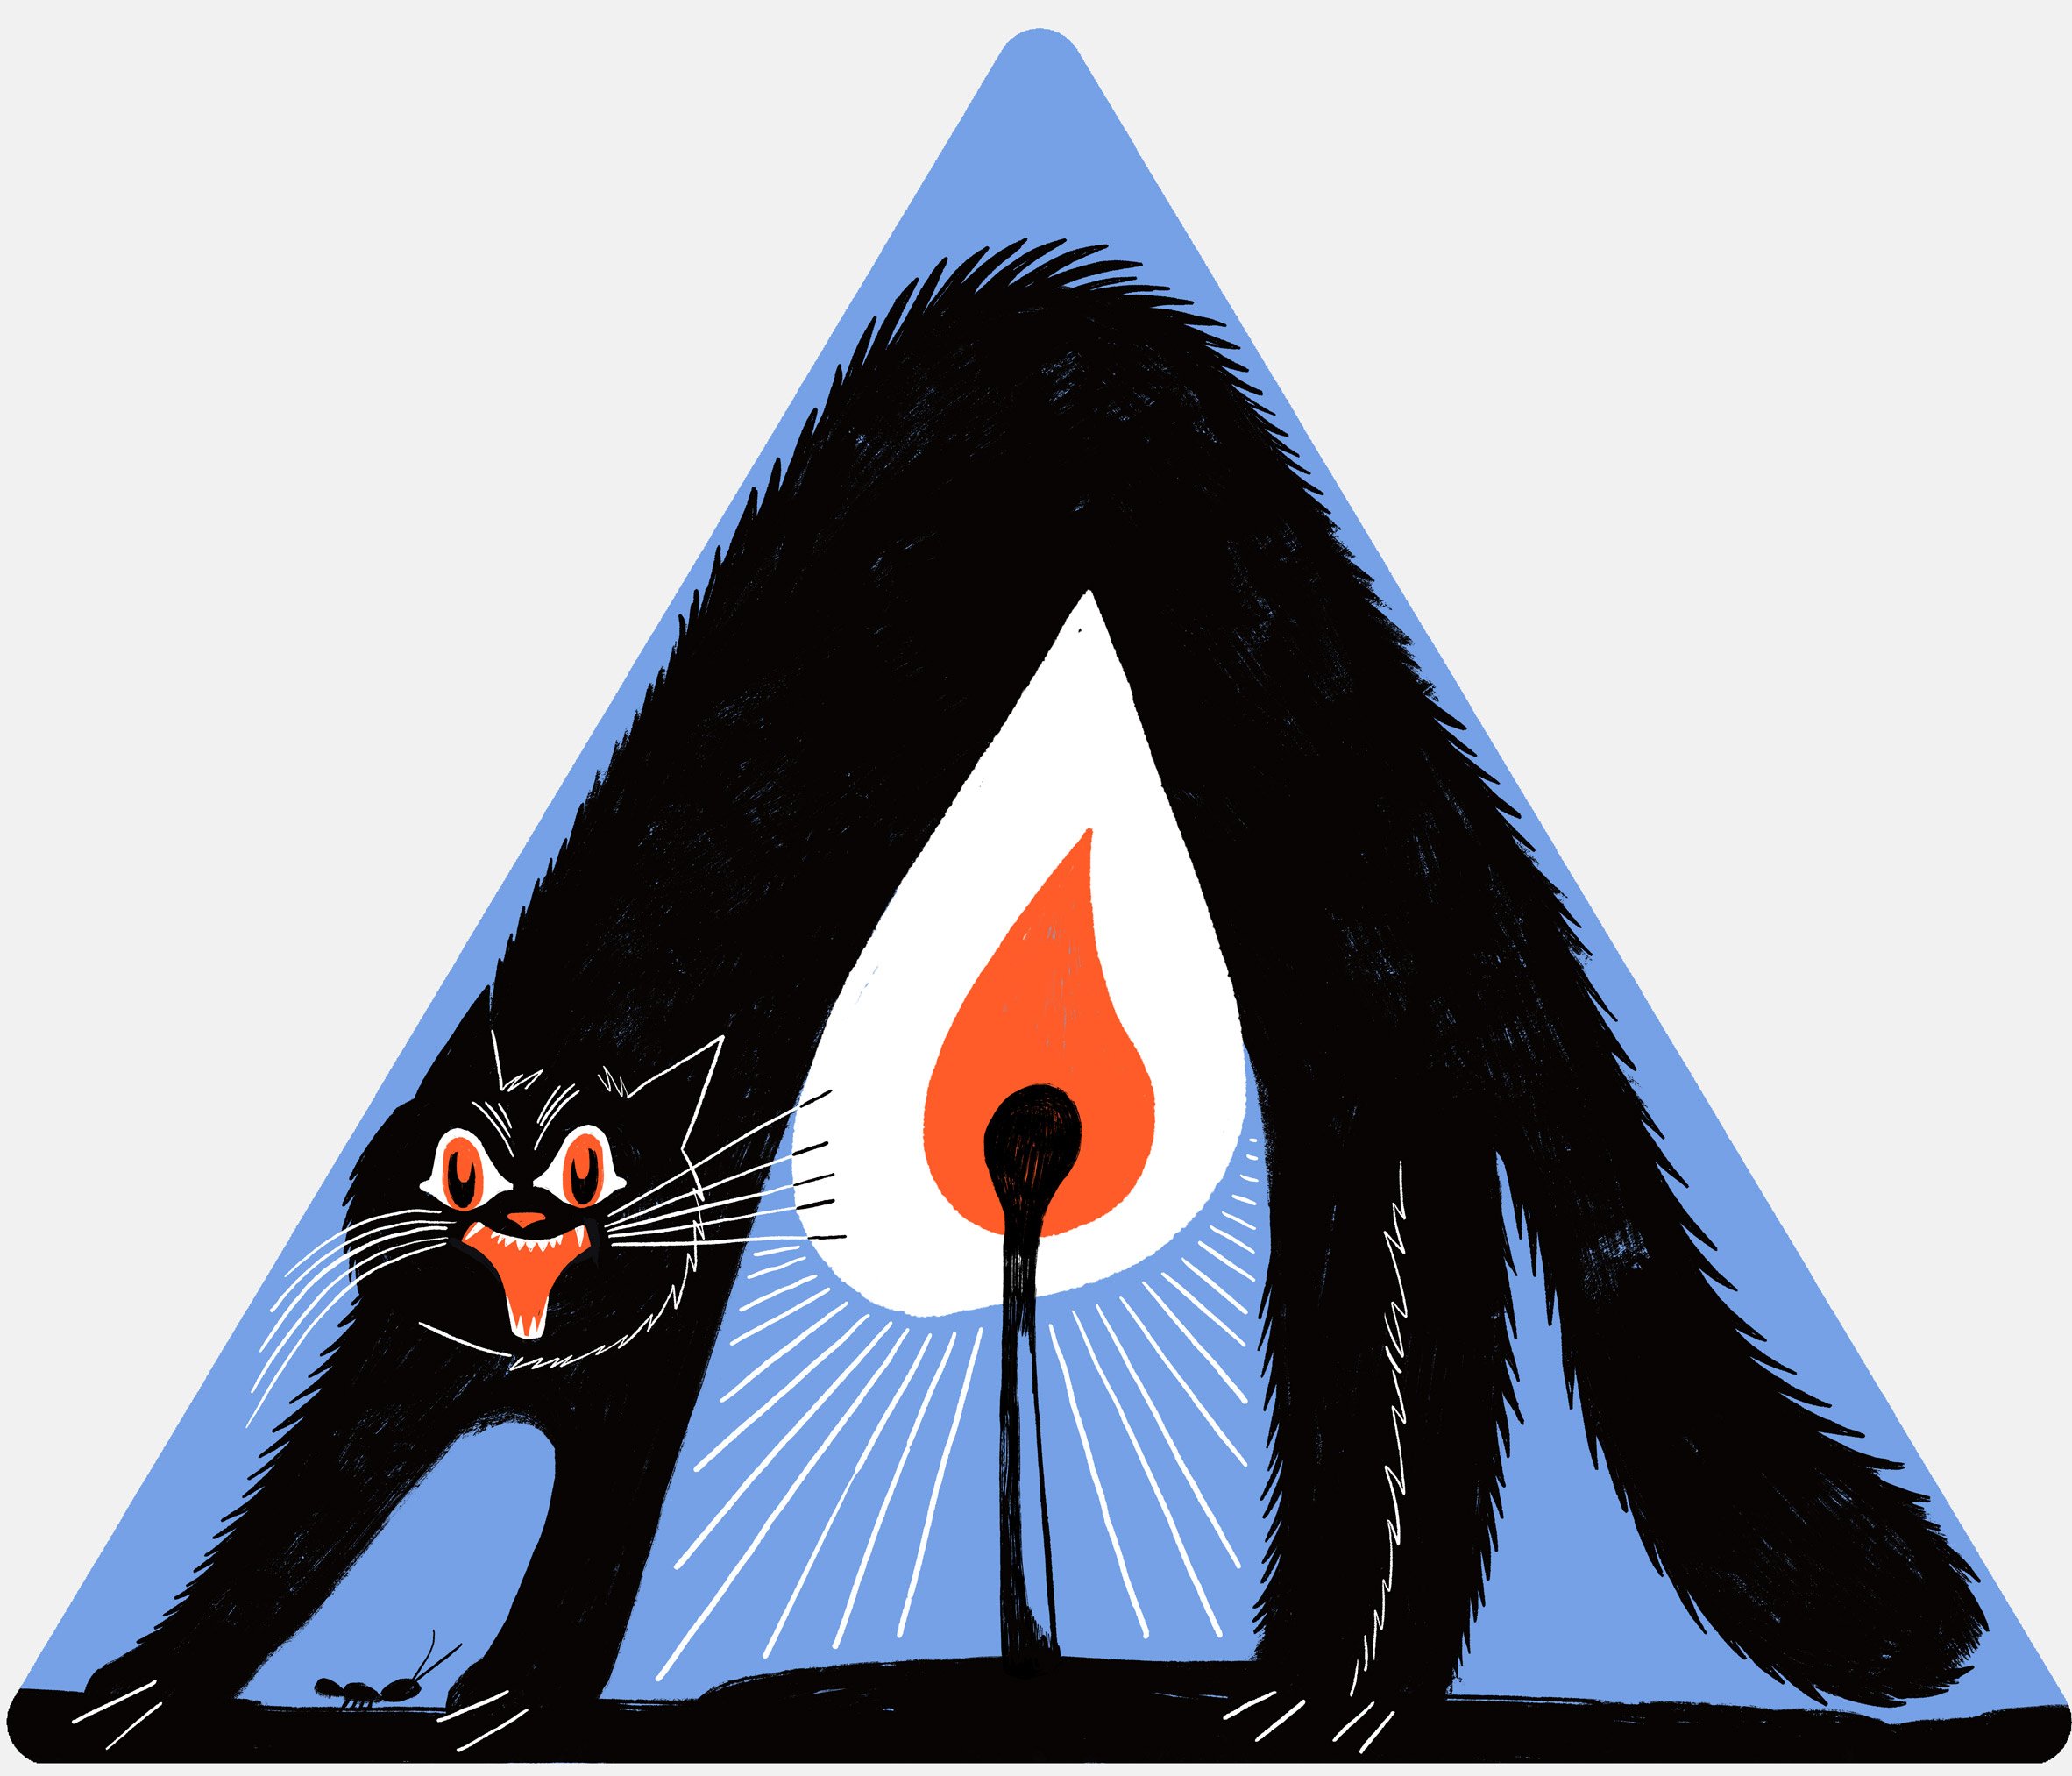 Black cat illustrated on a blue triangle with a lit match